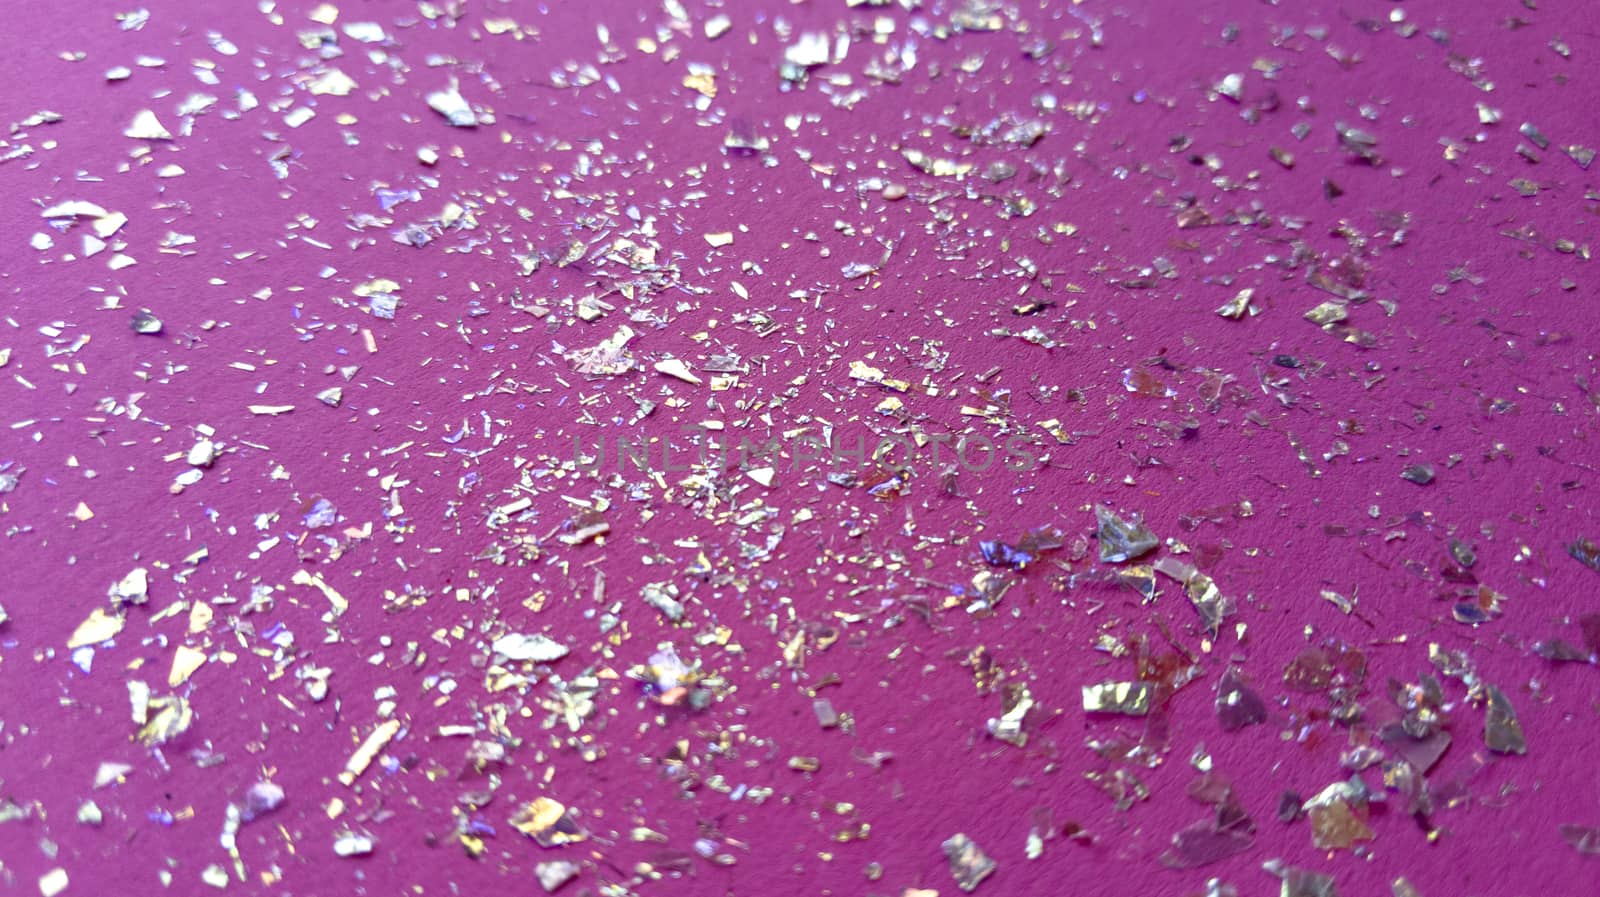 Foil pieces on pink background with multi-colored shine. Abstract fashion macro photo.